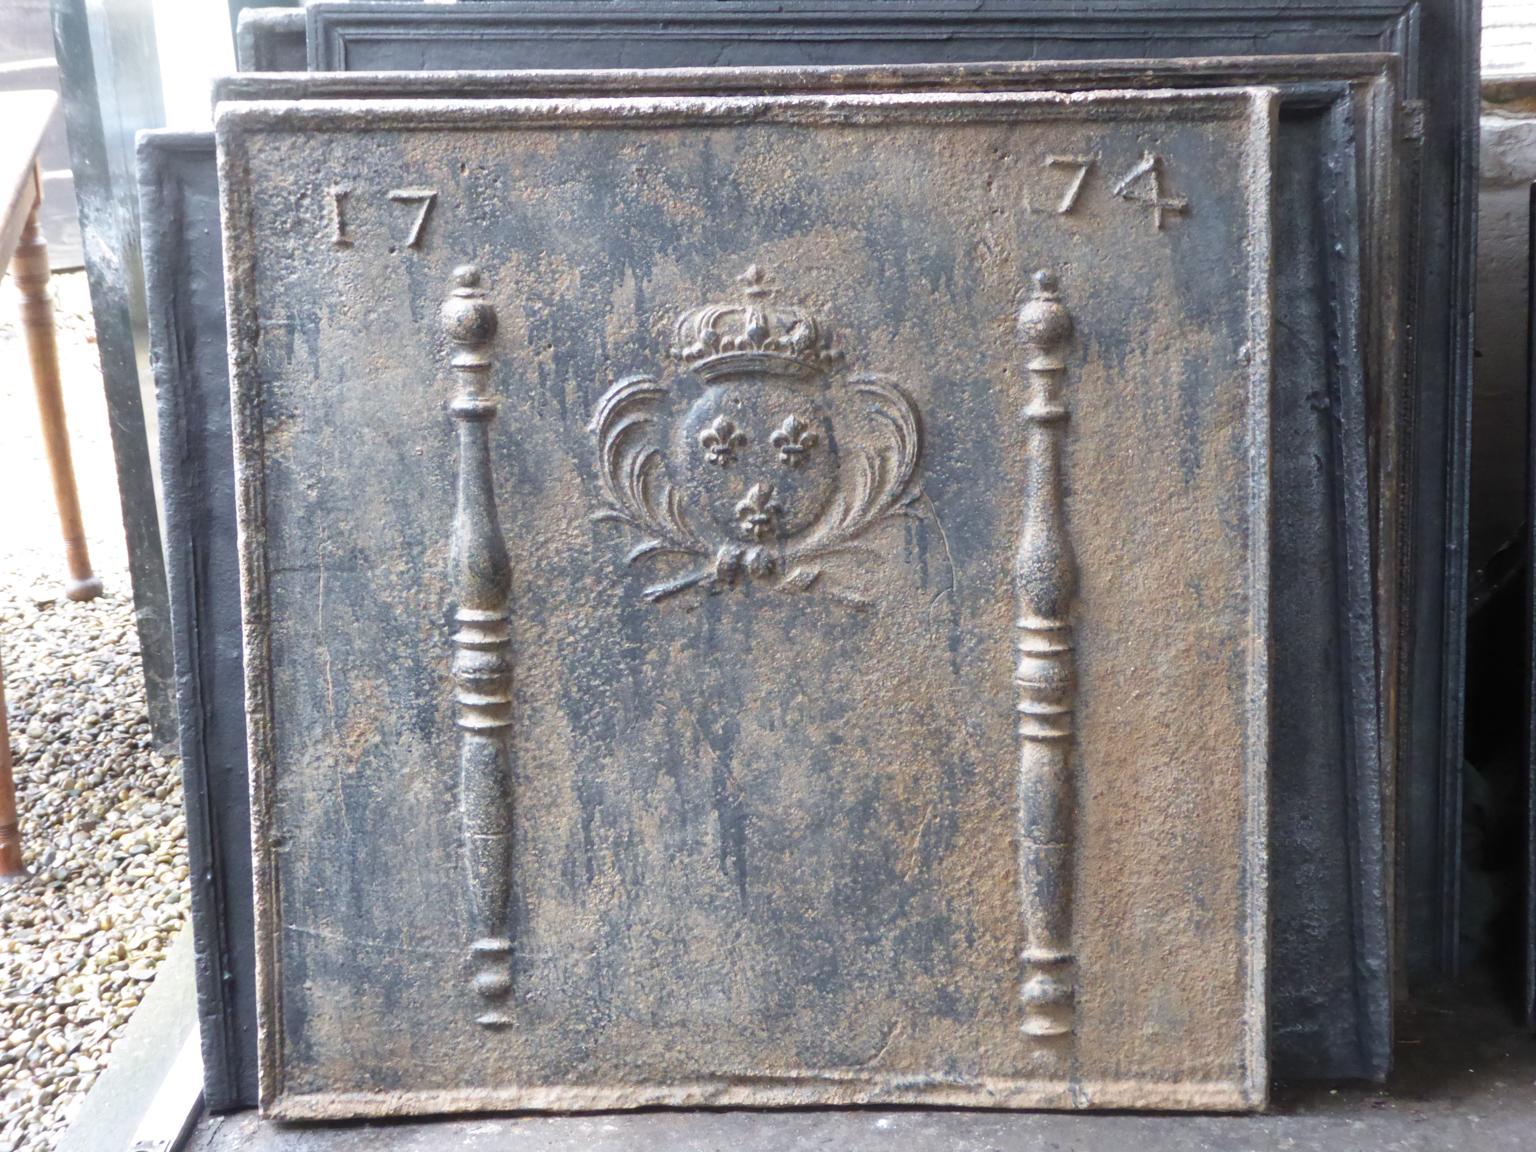 Beautiful 18th century French Louis XIV fireback with the arms of France. The Arms of France are flanked by two Pillars of Hercules, which symbolize strength and the unknown. The date of production of the fireback, 1774, is also cast in the